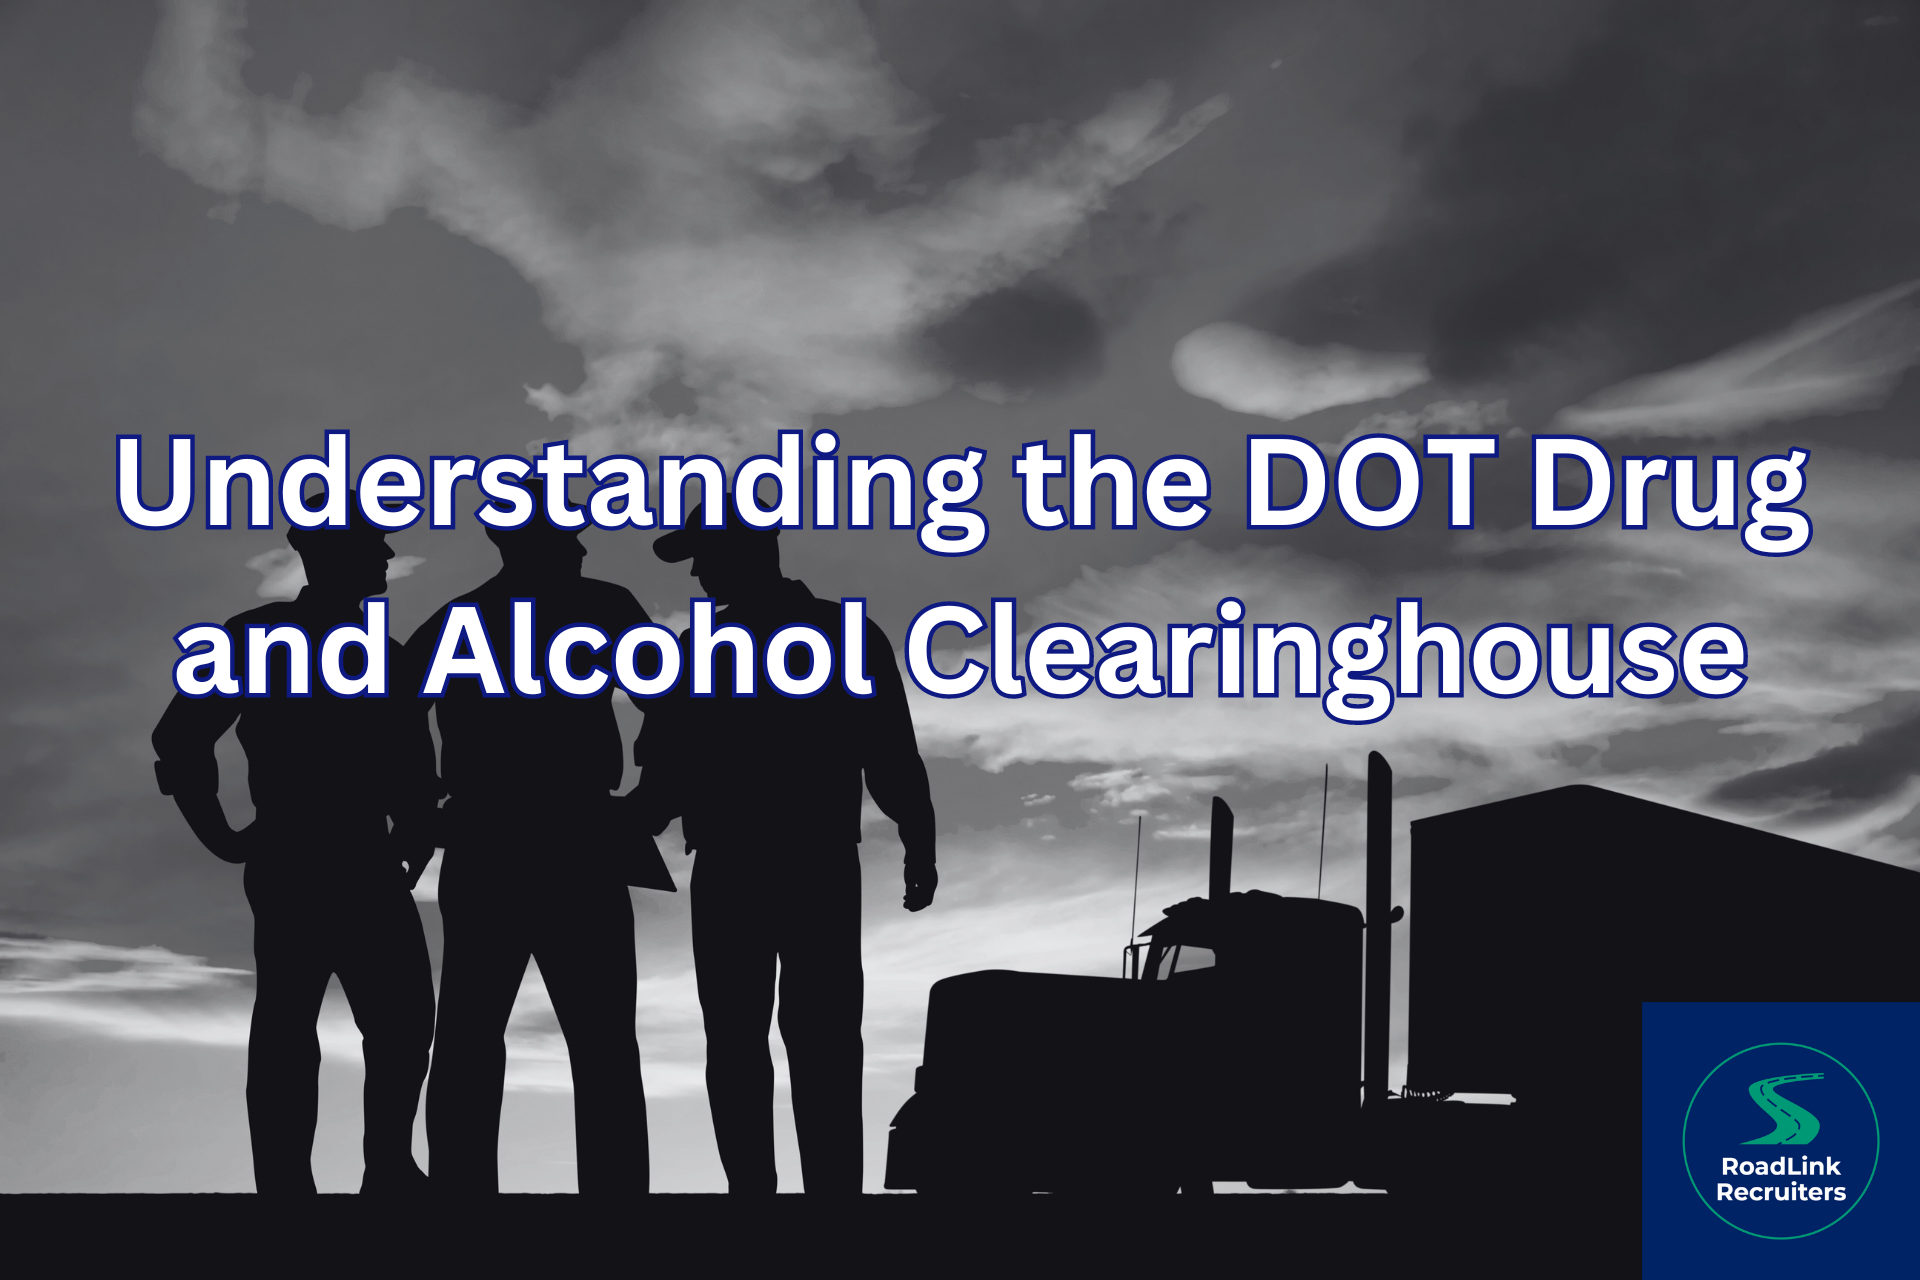 DOT Drug & Alcohol Clearinghouse